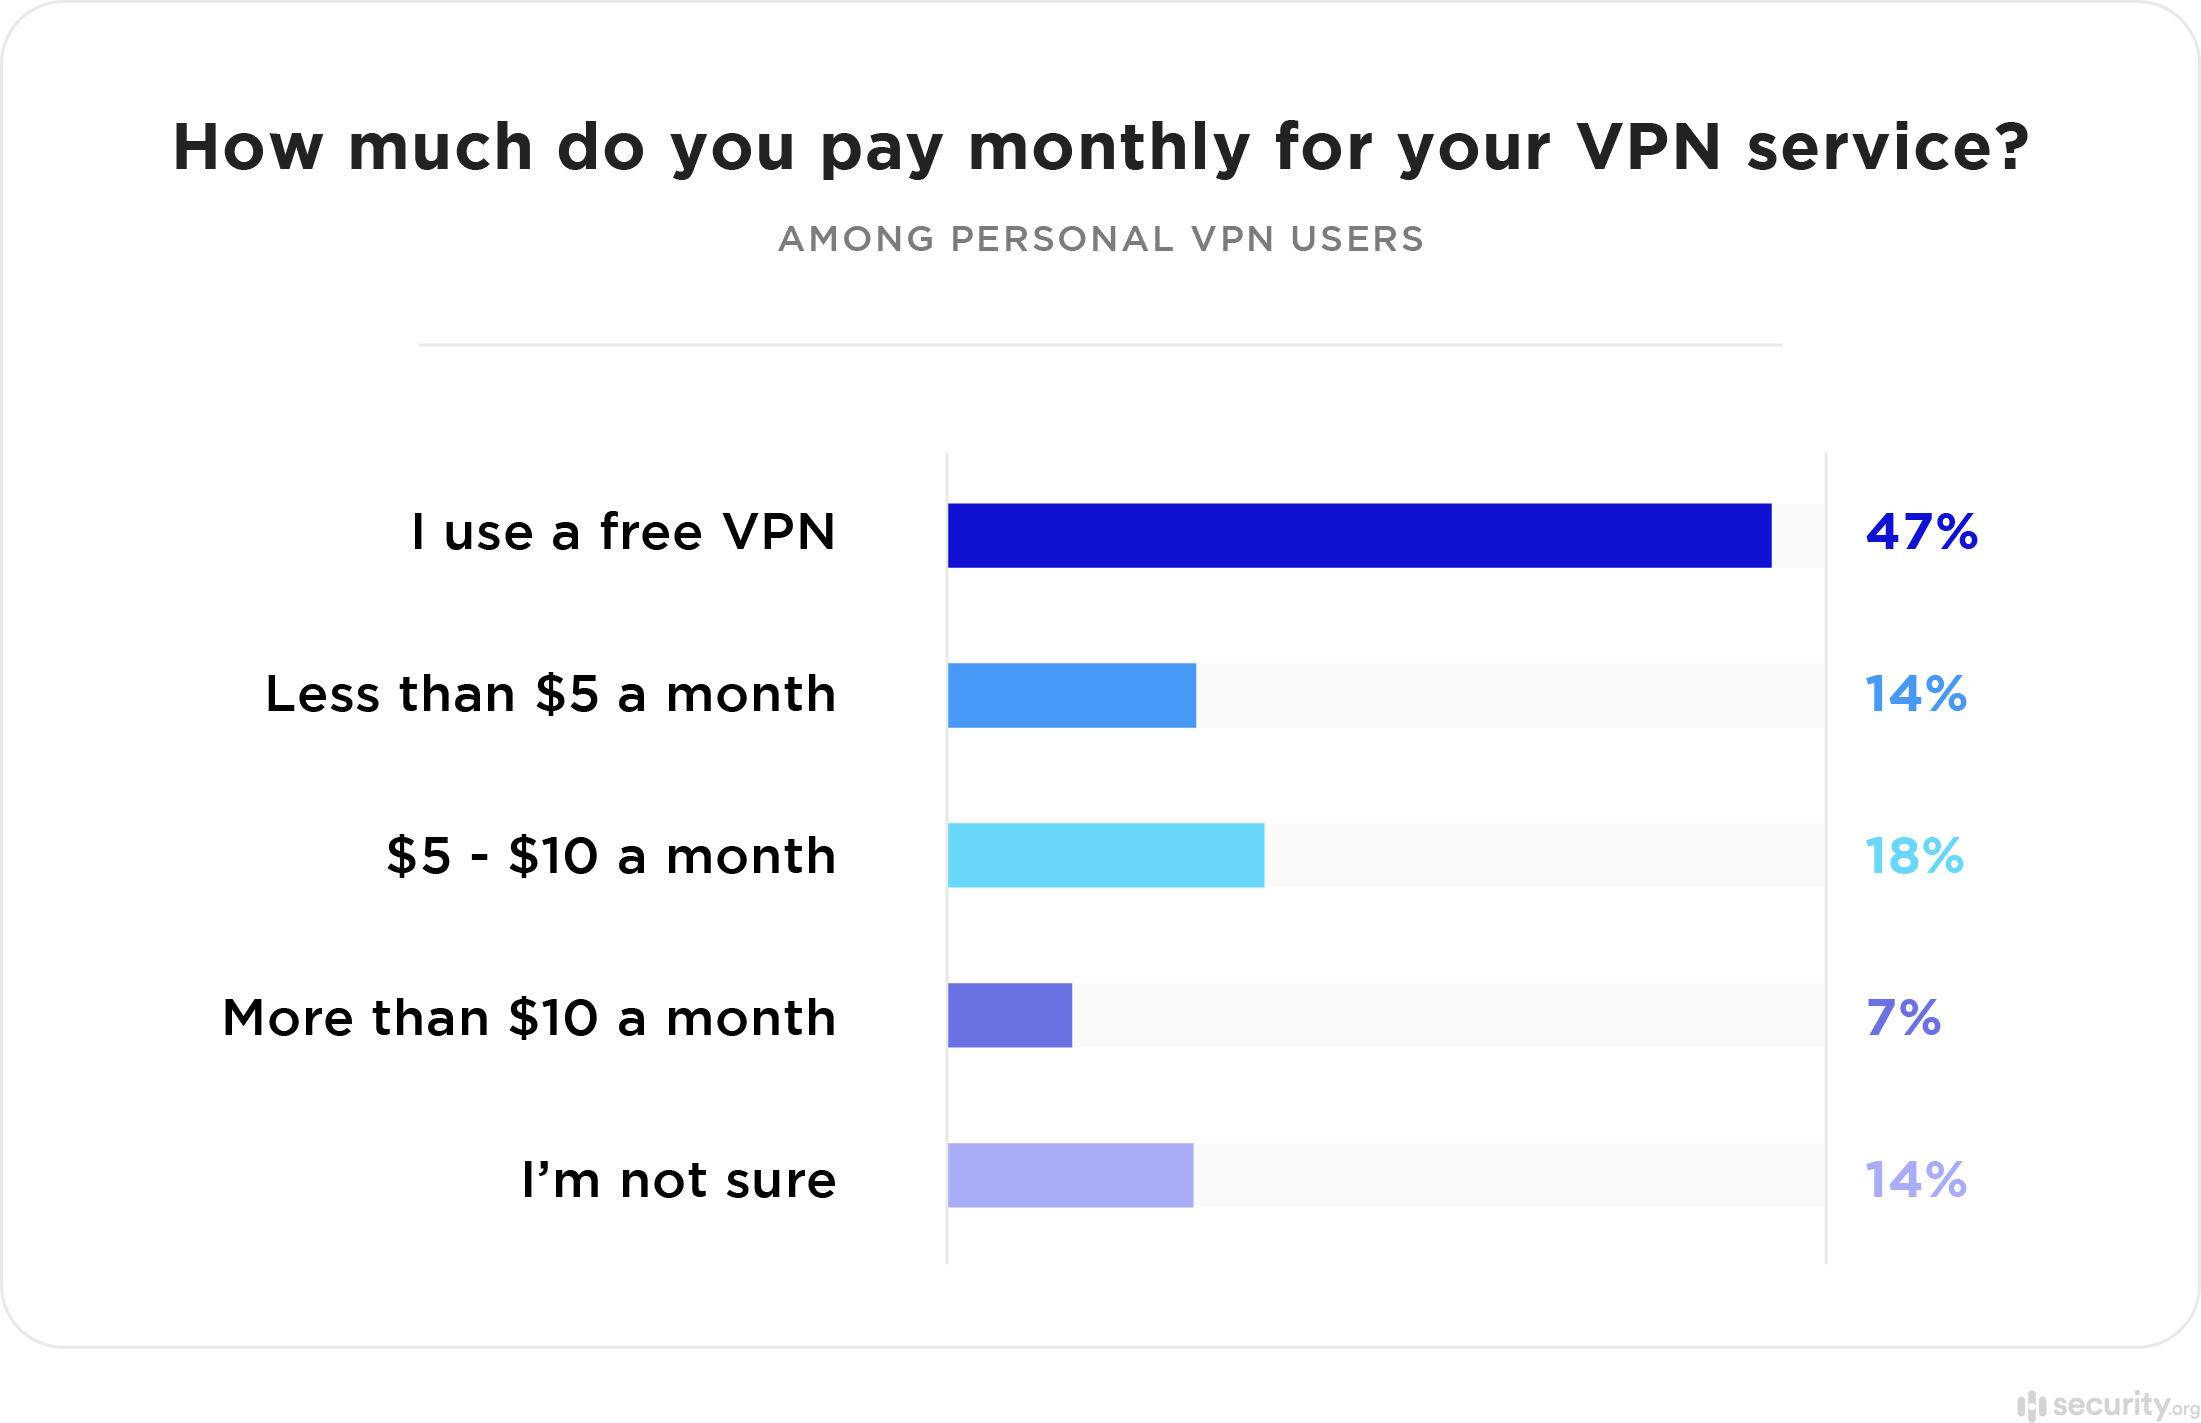 Does it cost money to use a VPN?